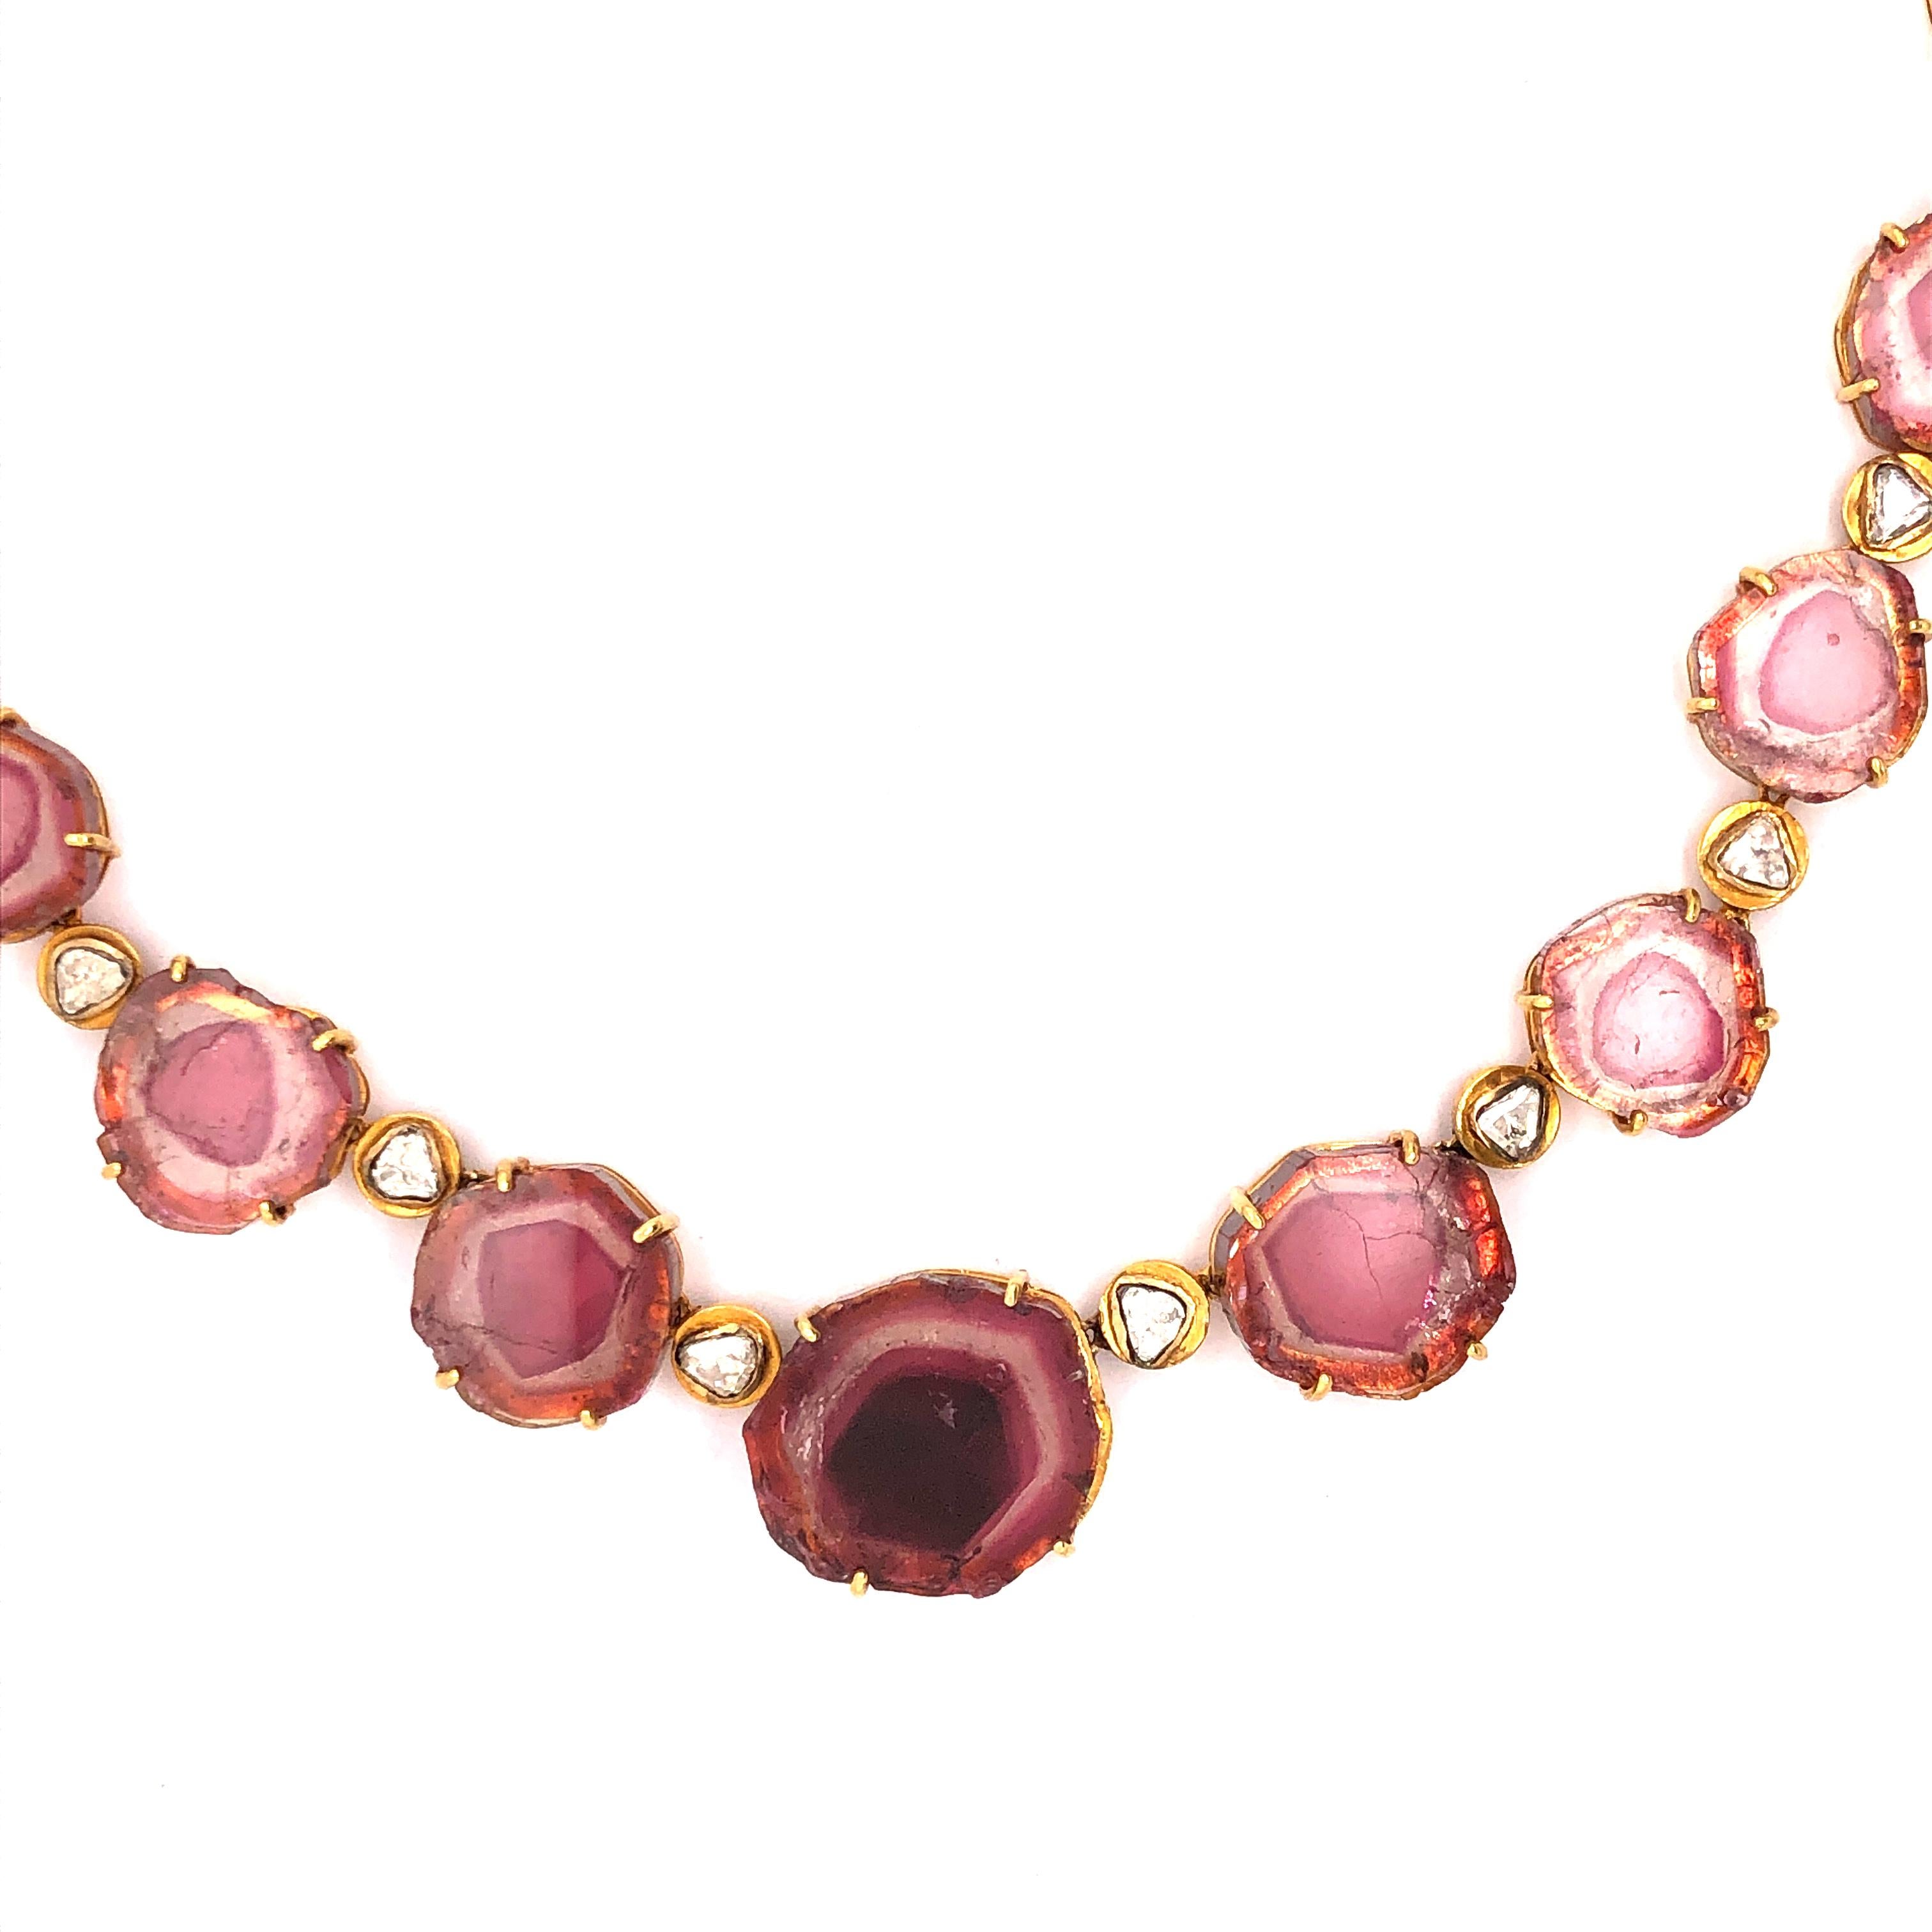 Modern One of a Kind Watermelon Tourmaline Necklace in Gold with Diamonds